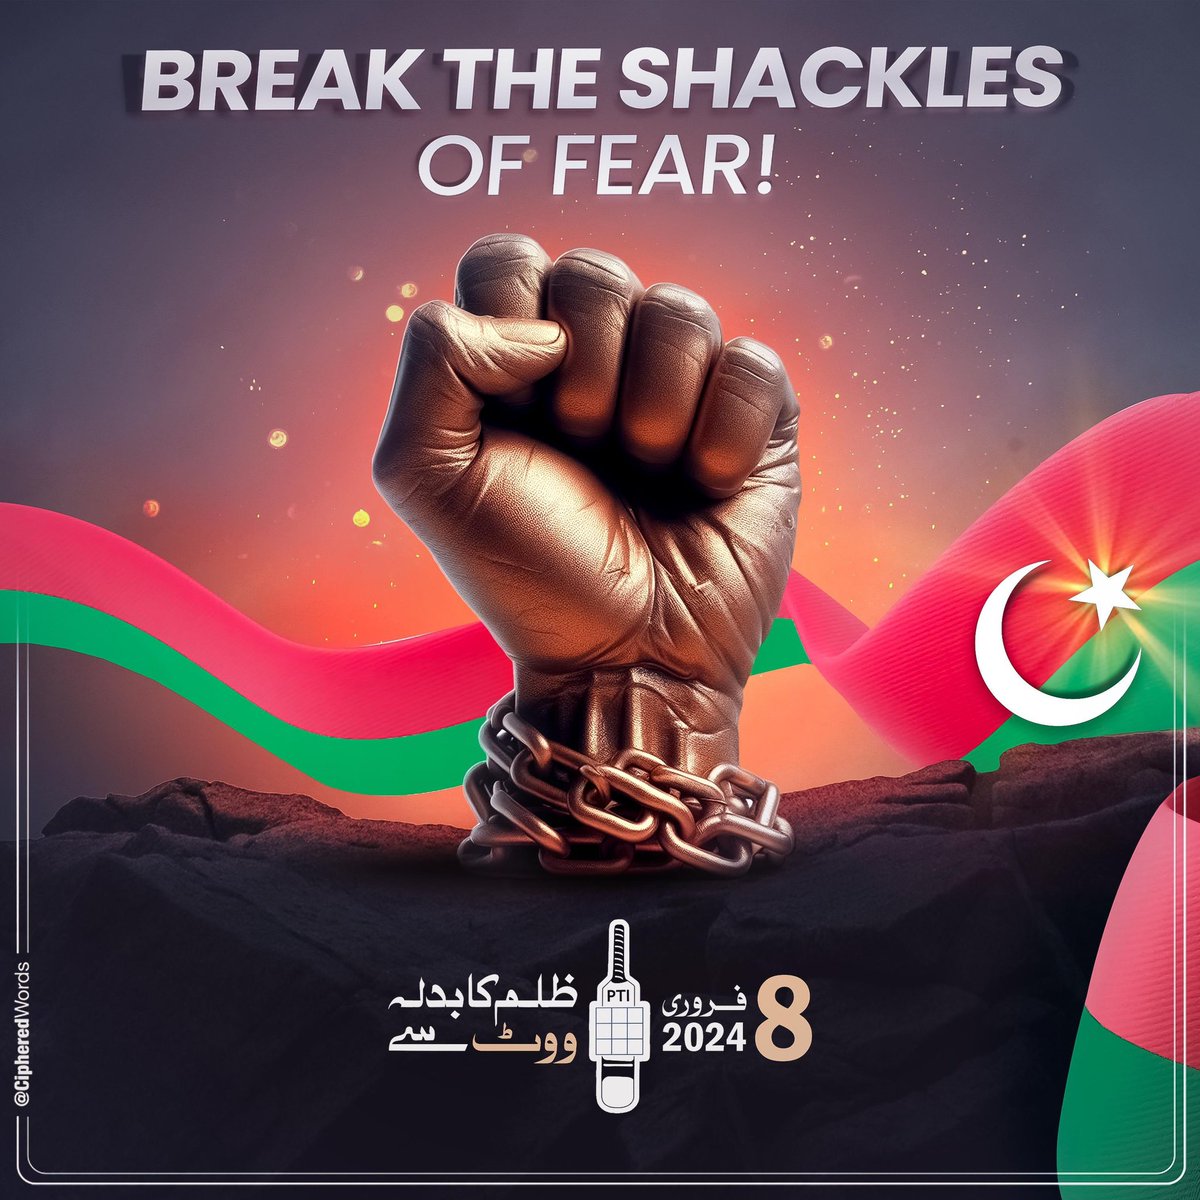 Breaking the shackles of fear, the ballot emerges as a powerful force. Let your vote be the voice that shatters barriers.
#ElectionEmpowerment
#imrankhan #imrankhanpti #election2023 #عمران_احمد_خان_نیازی #PakistanUnderFascism #ImranKhanForPakistan